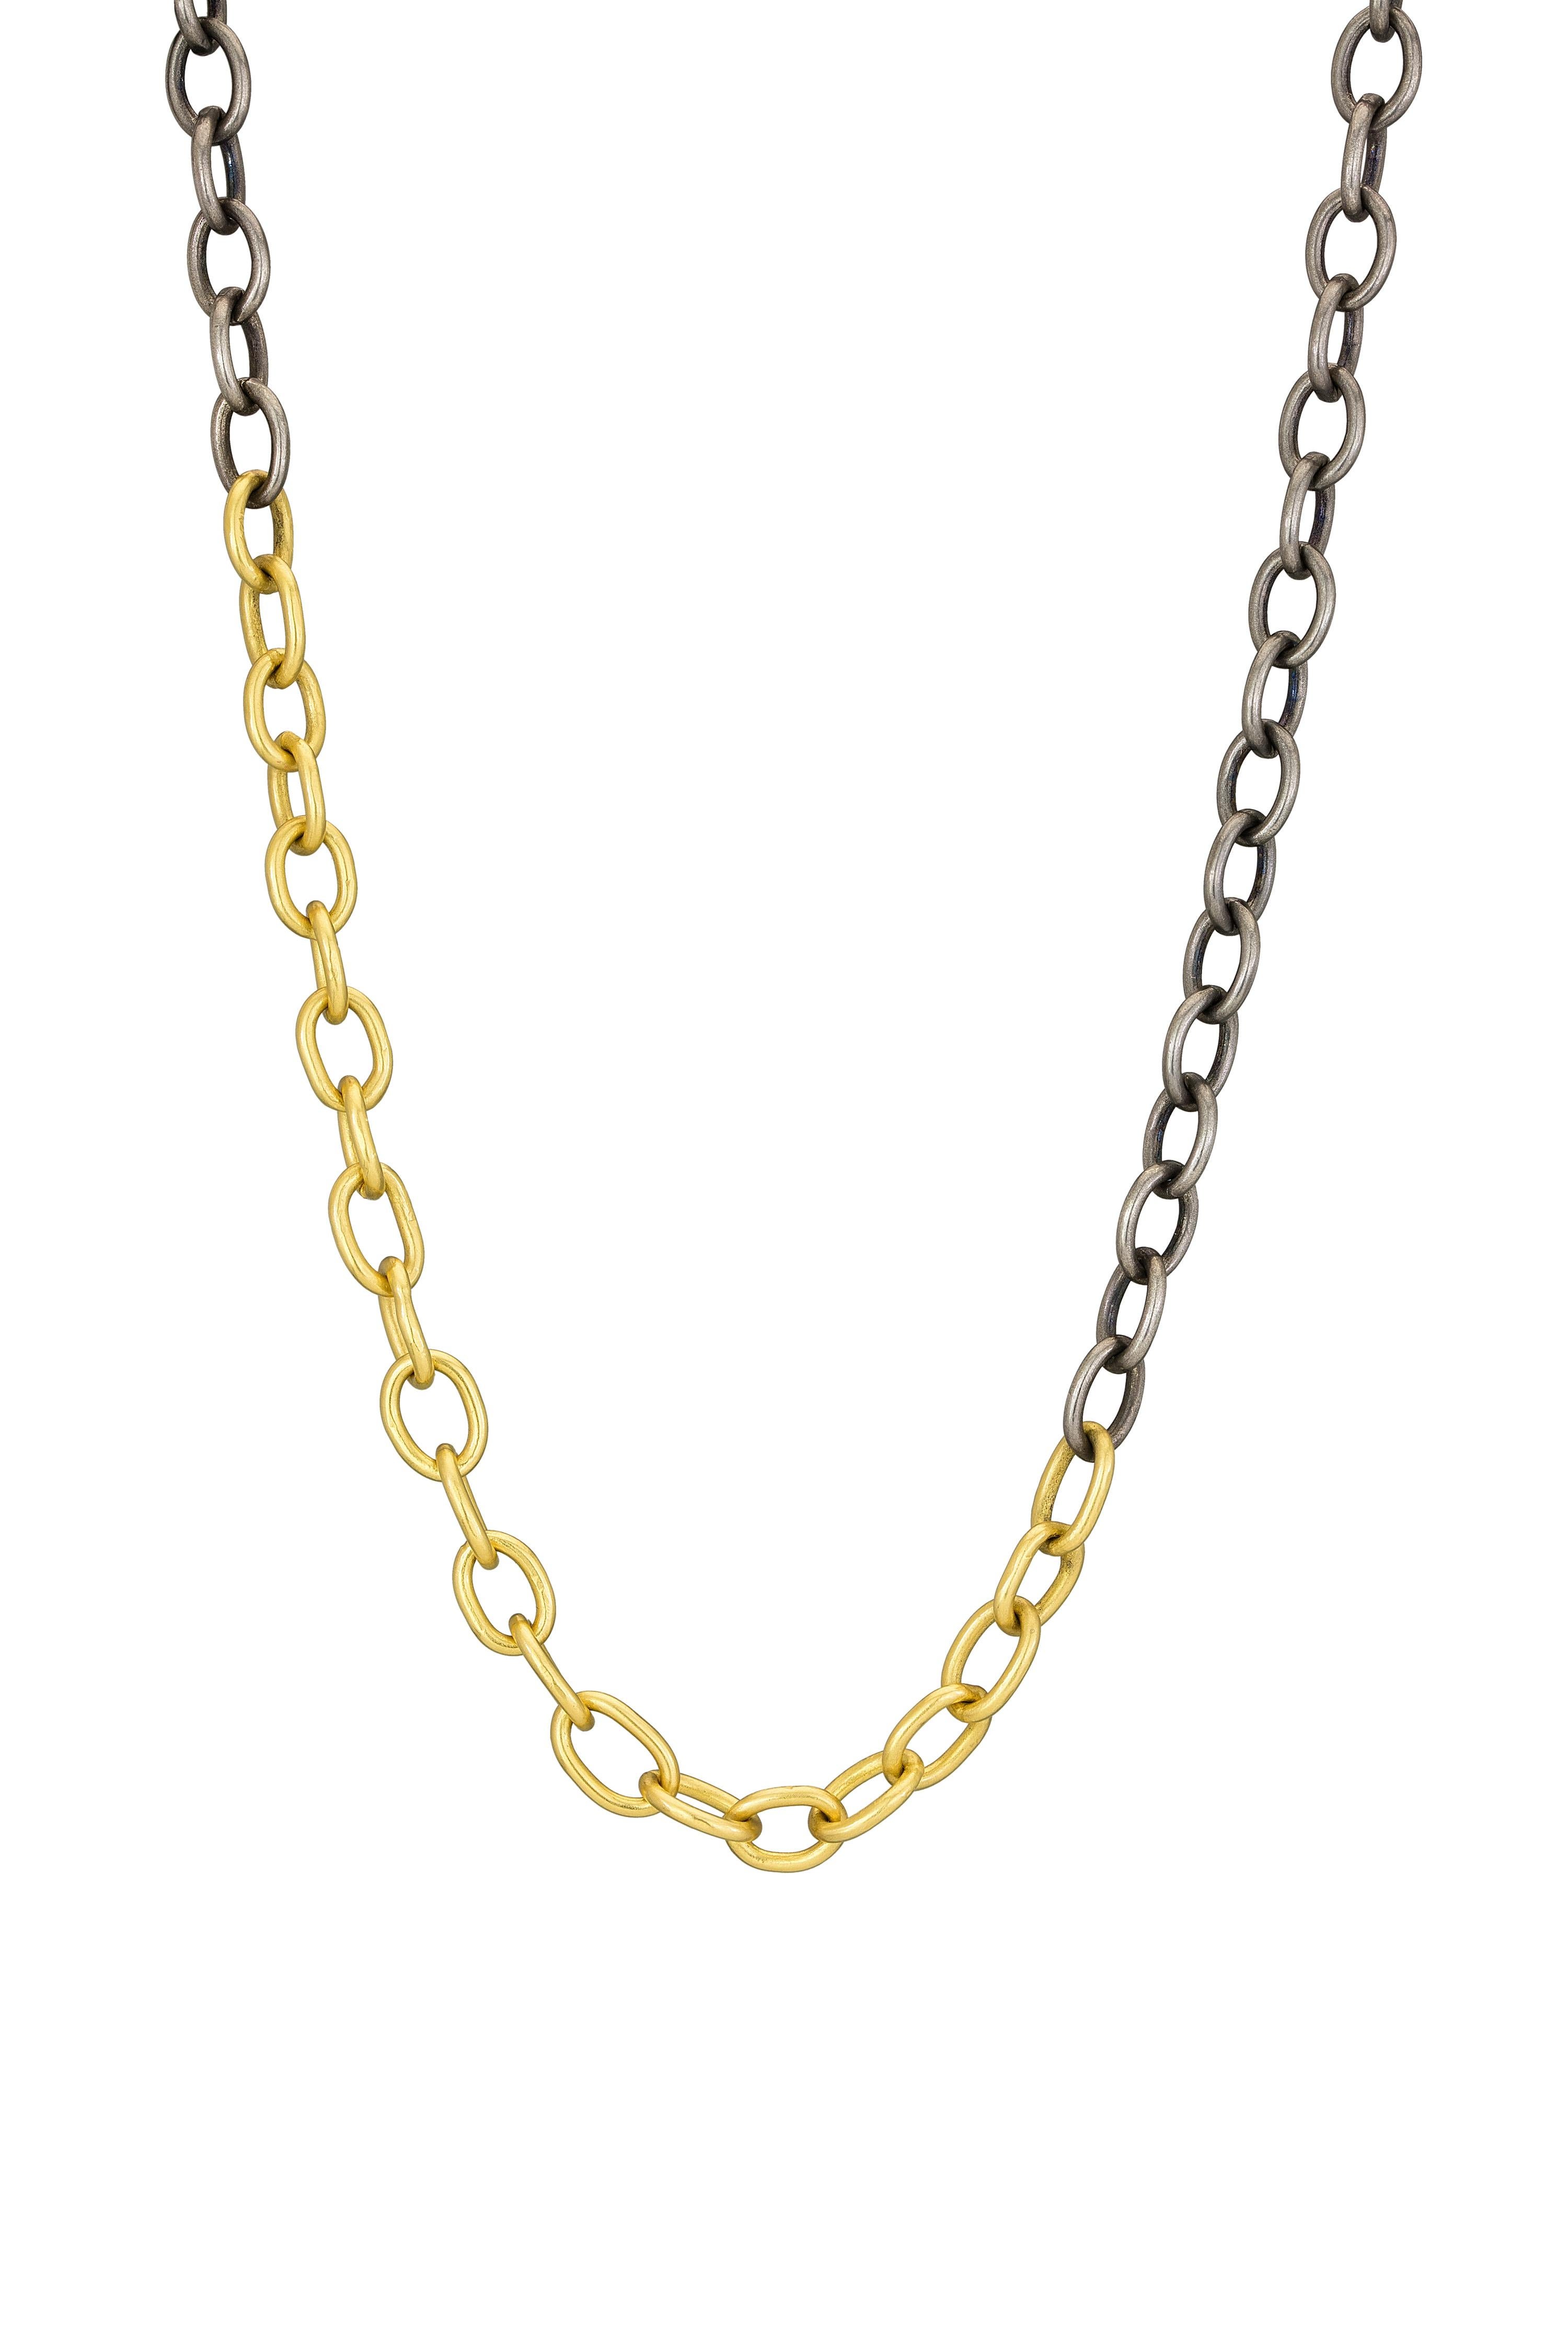 Artisan Stephanie Albertson 22 Karat Gold, Blackened Silver Mixed Metal Oval Link Chain For Sale